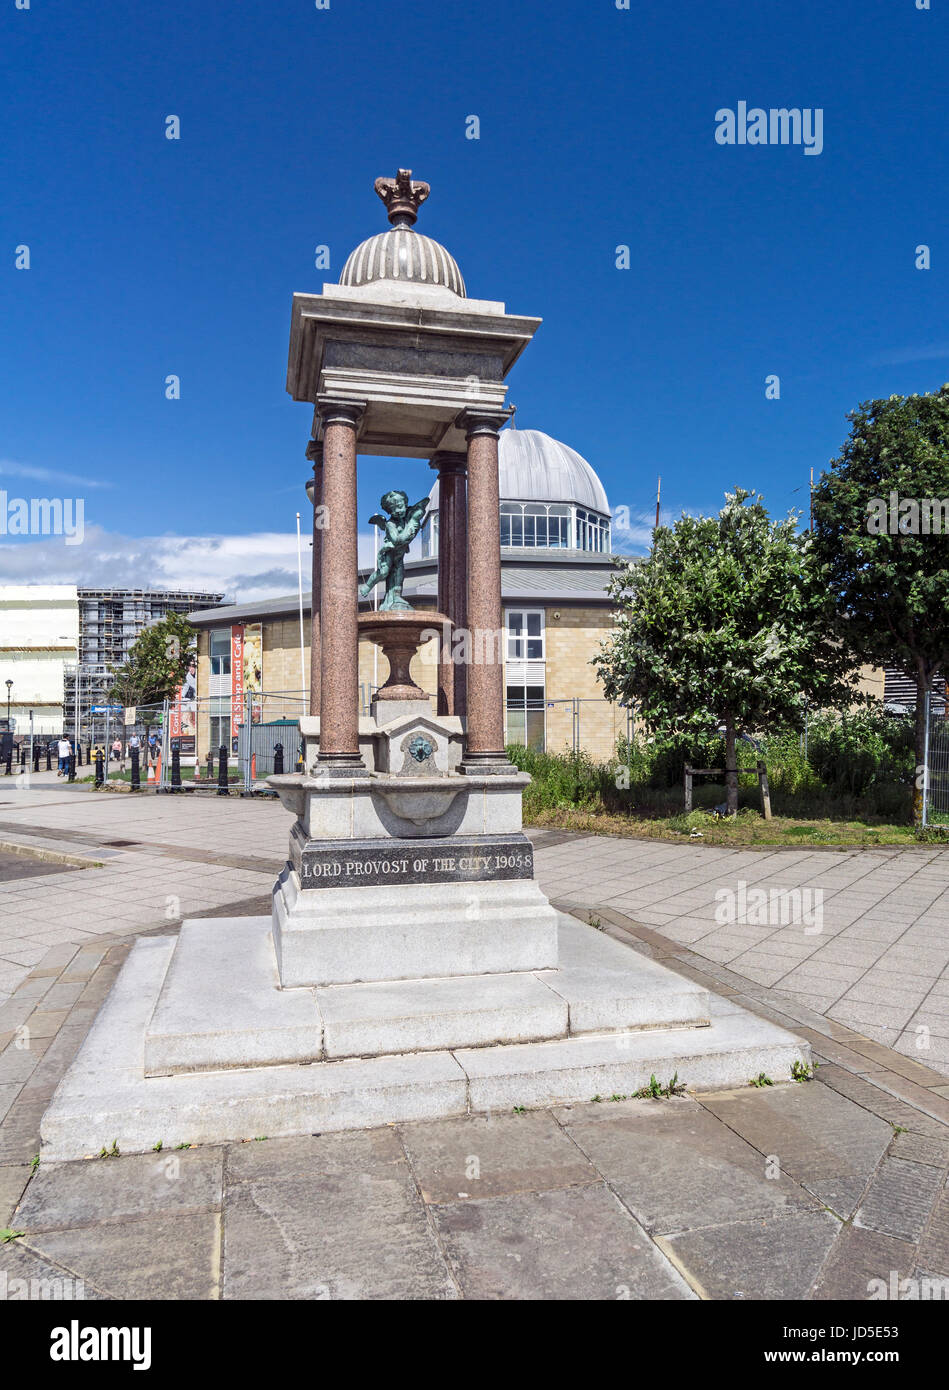 Lord Provost of the City 1905-8 monument on the green circular walk by the Discovery building in Dundee Tayside Scotland UK Stock Photo